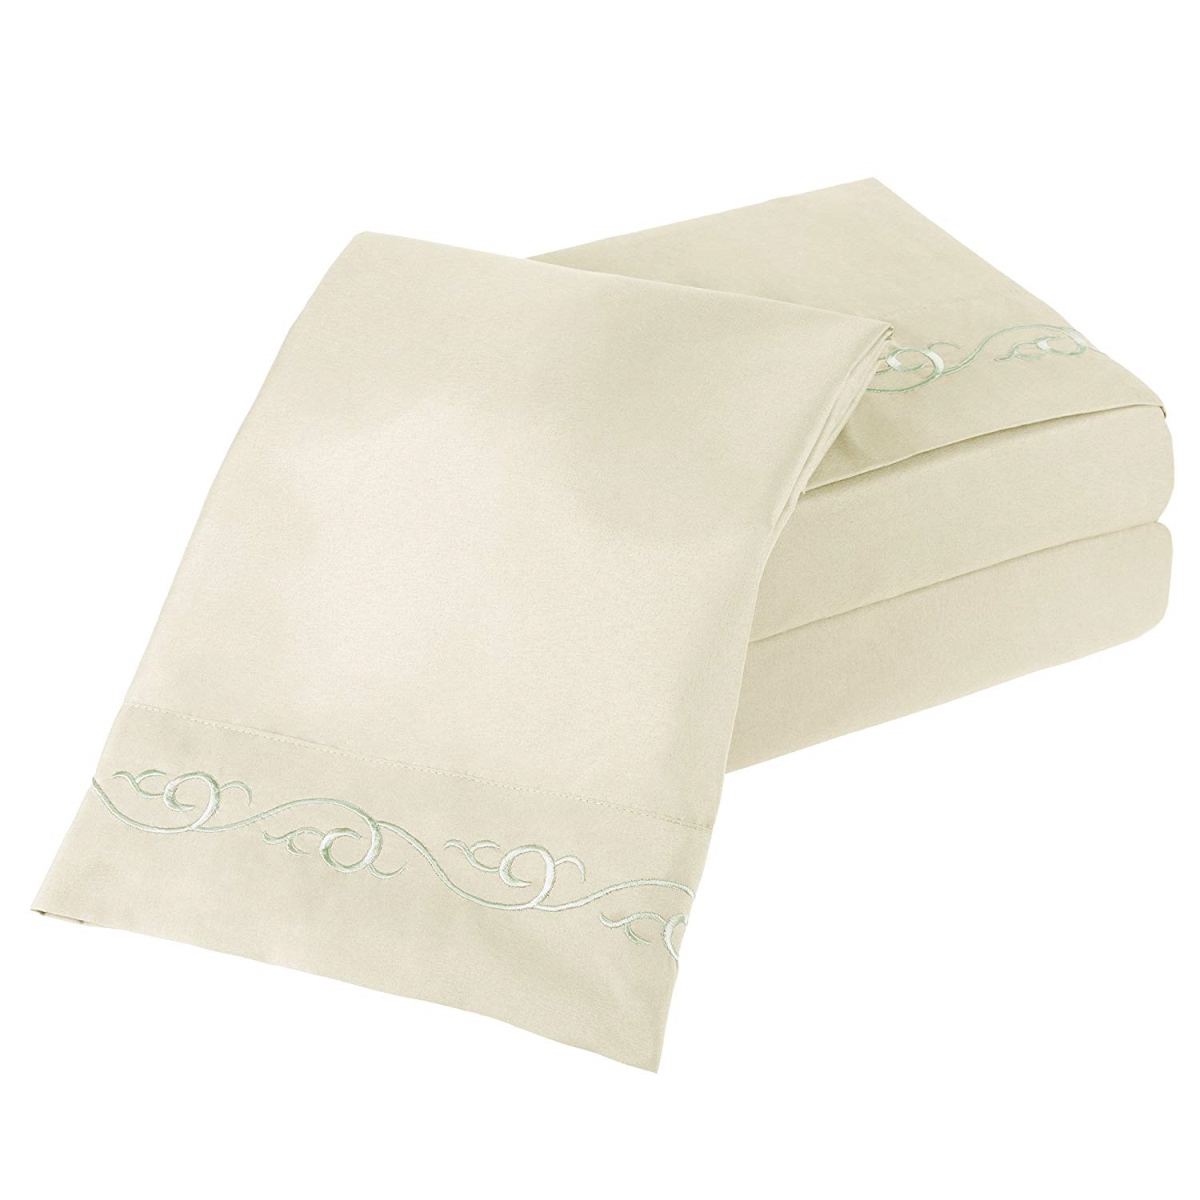 61a-17644 Embroidered Brushed Microfiber Sheets Set, King Size - Stone - 4 Piece